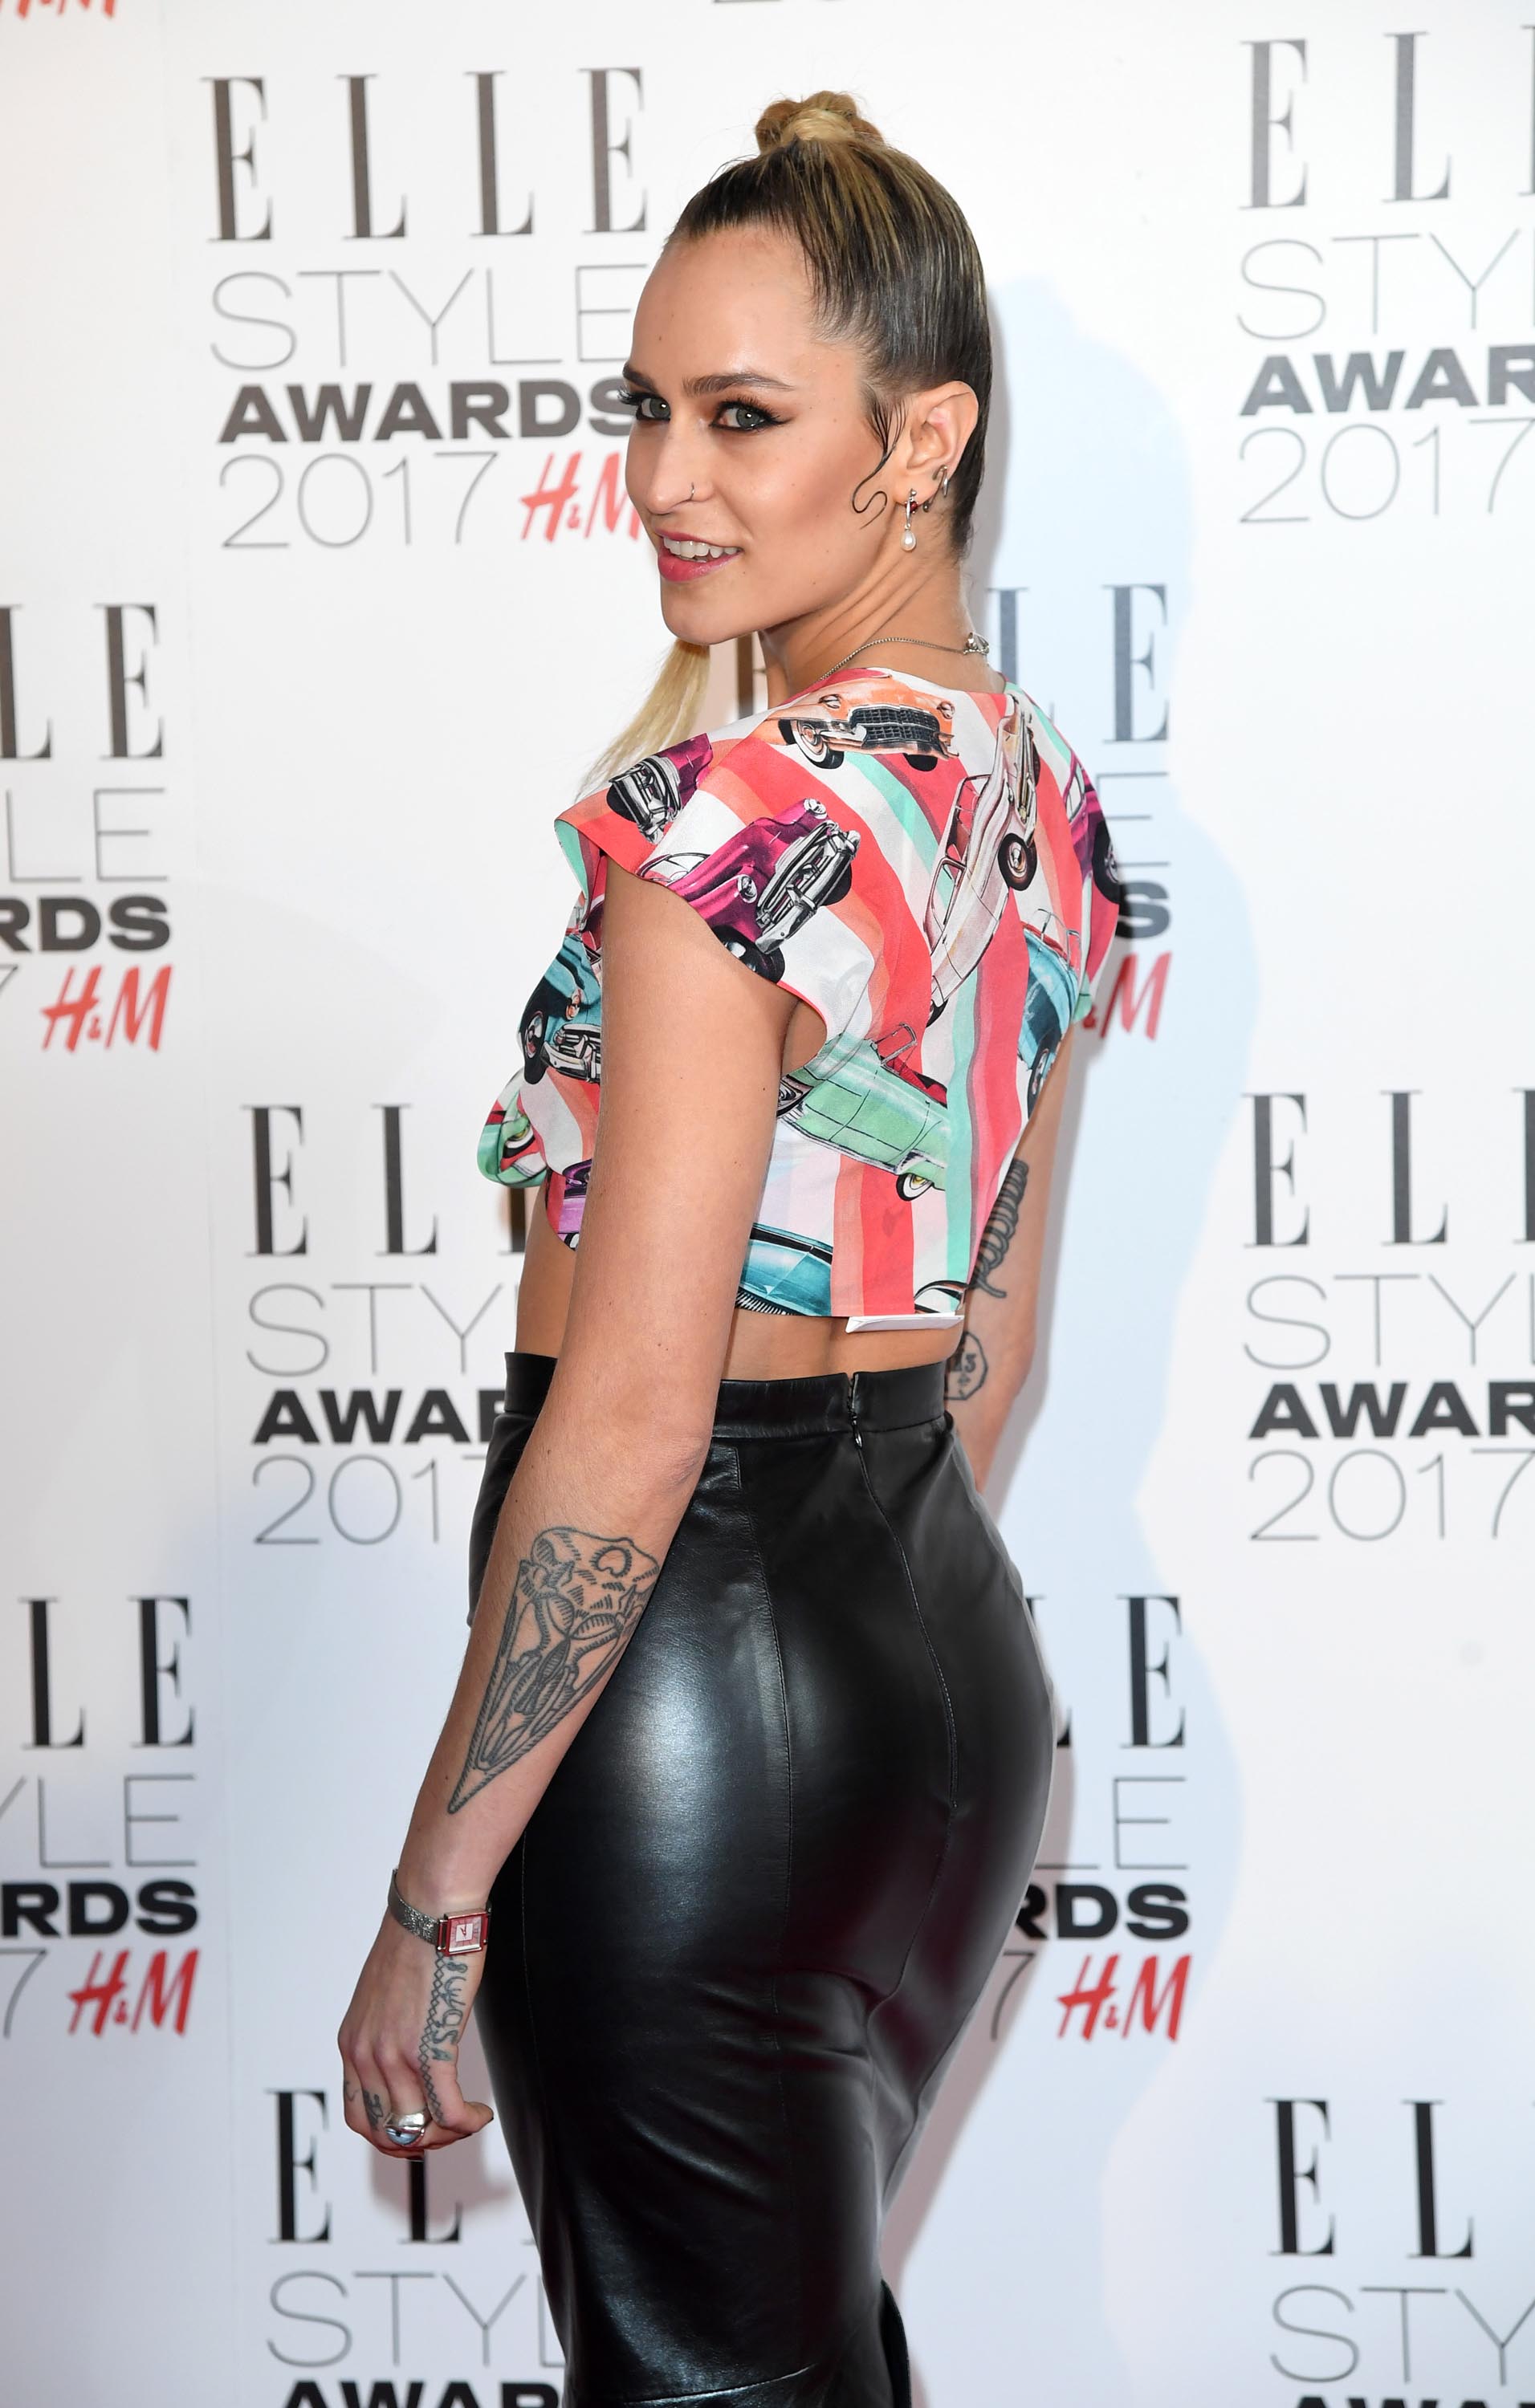 Alice Dellal attends the Elle Style Awards 2017